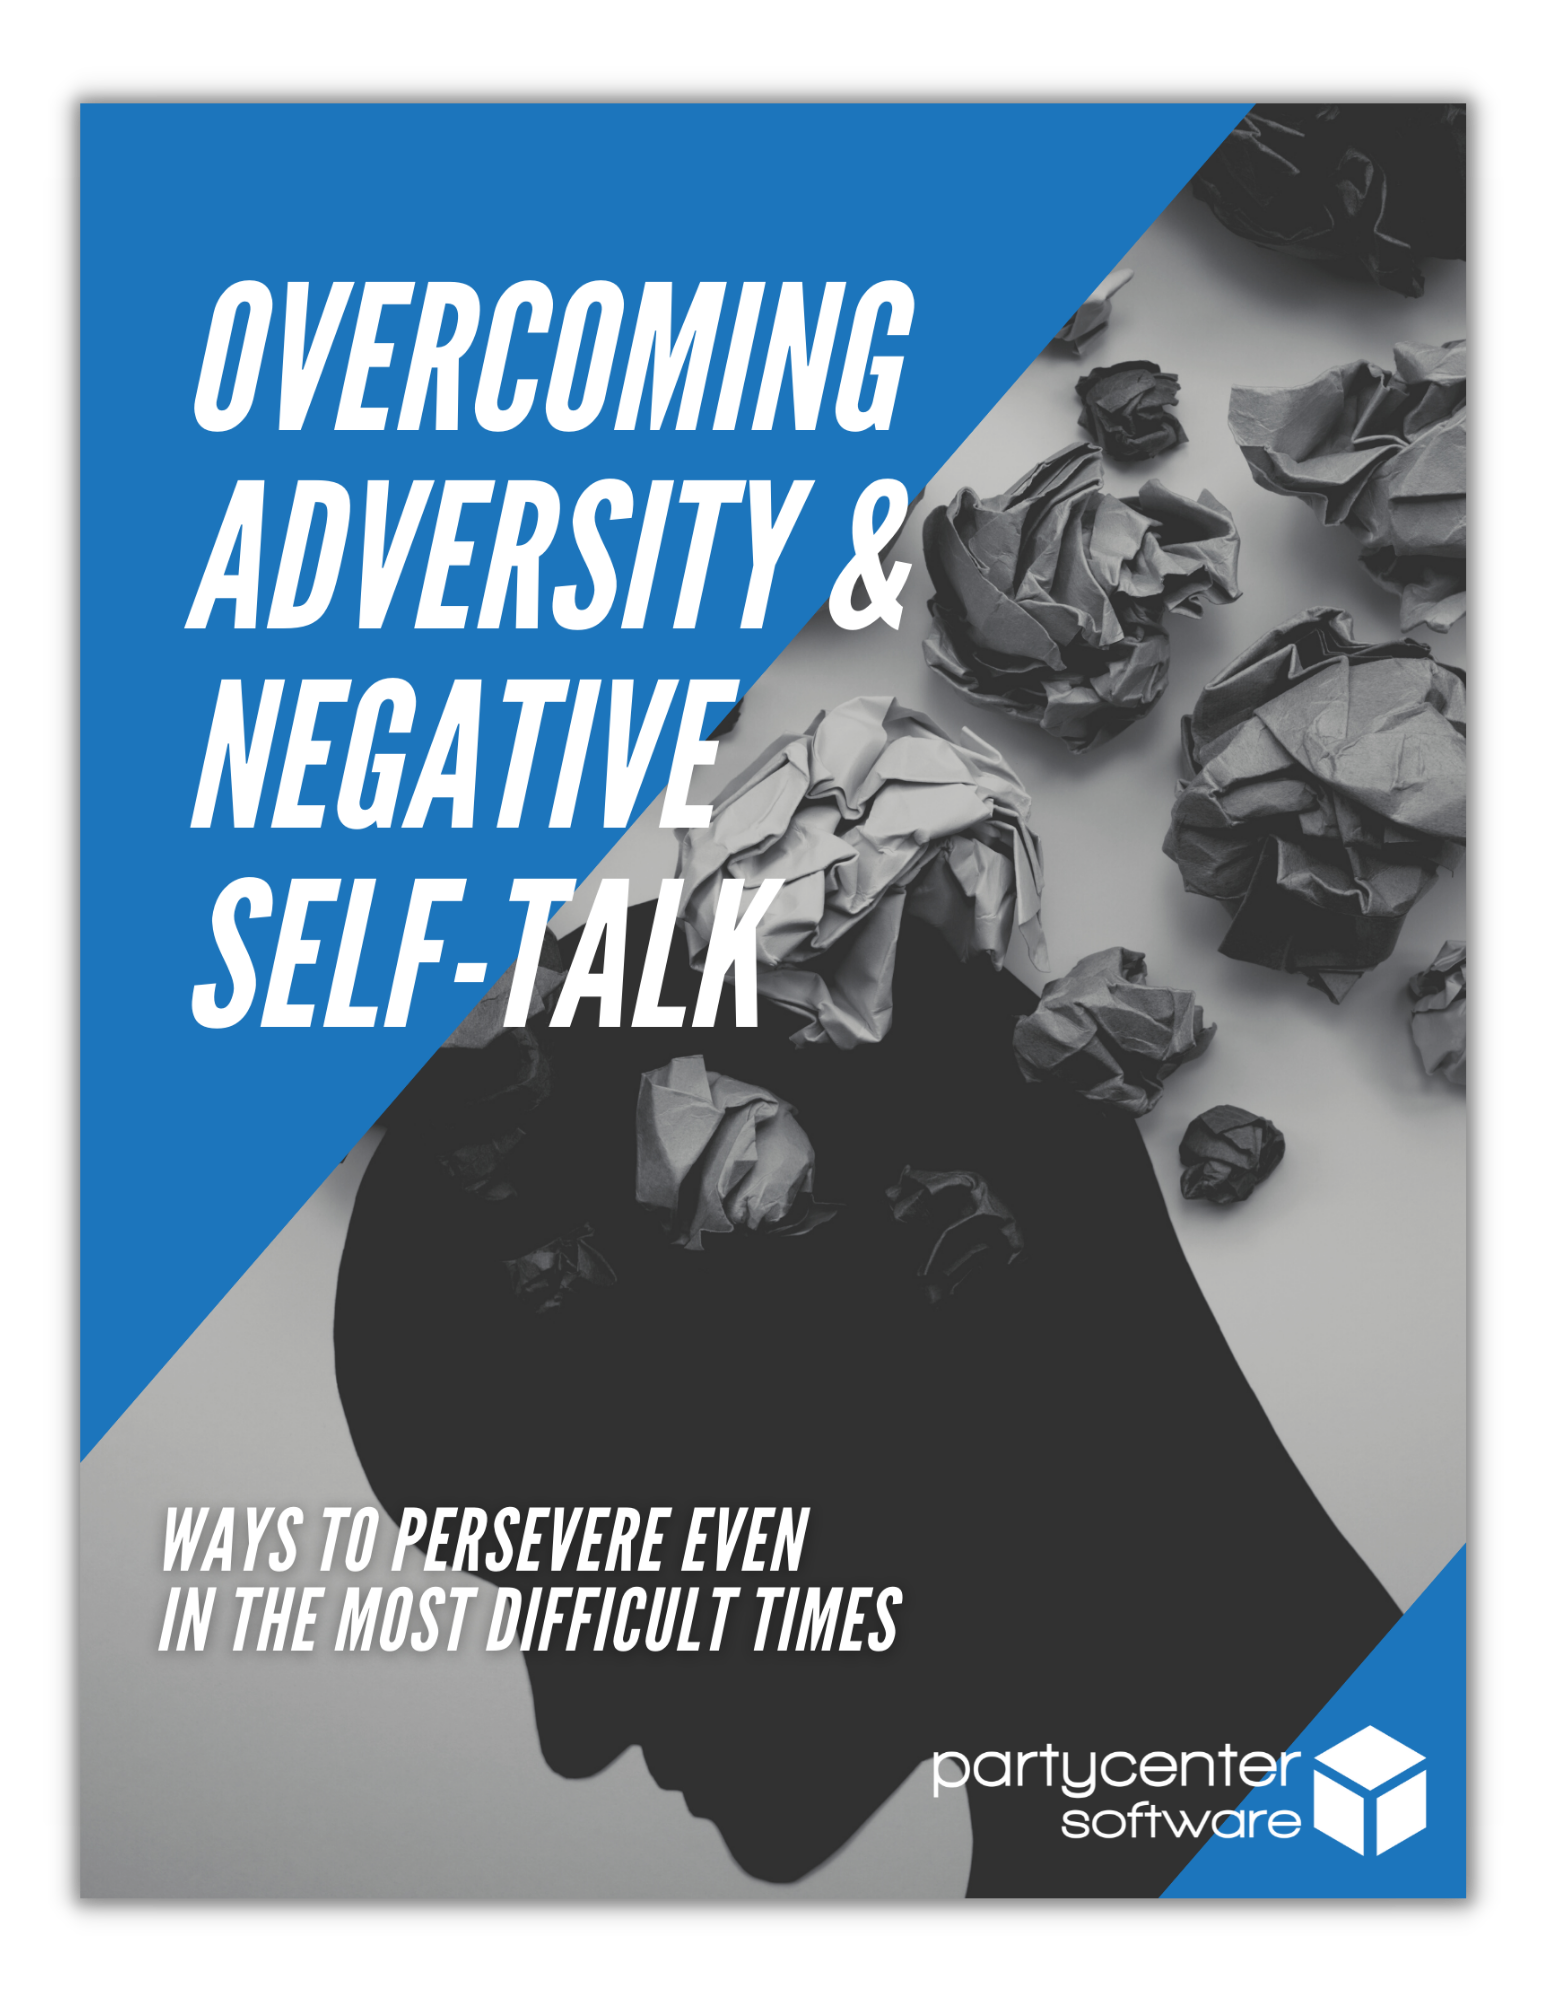 From trash-talking to support through adversity: Inside the